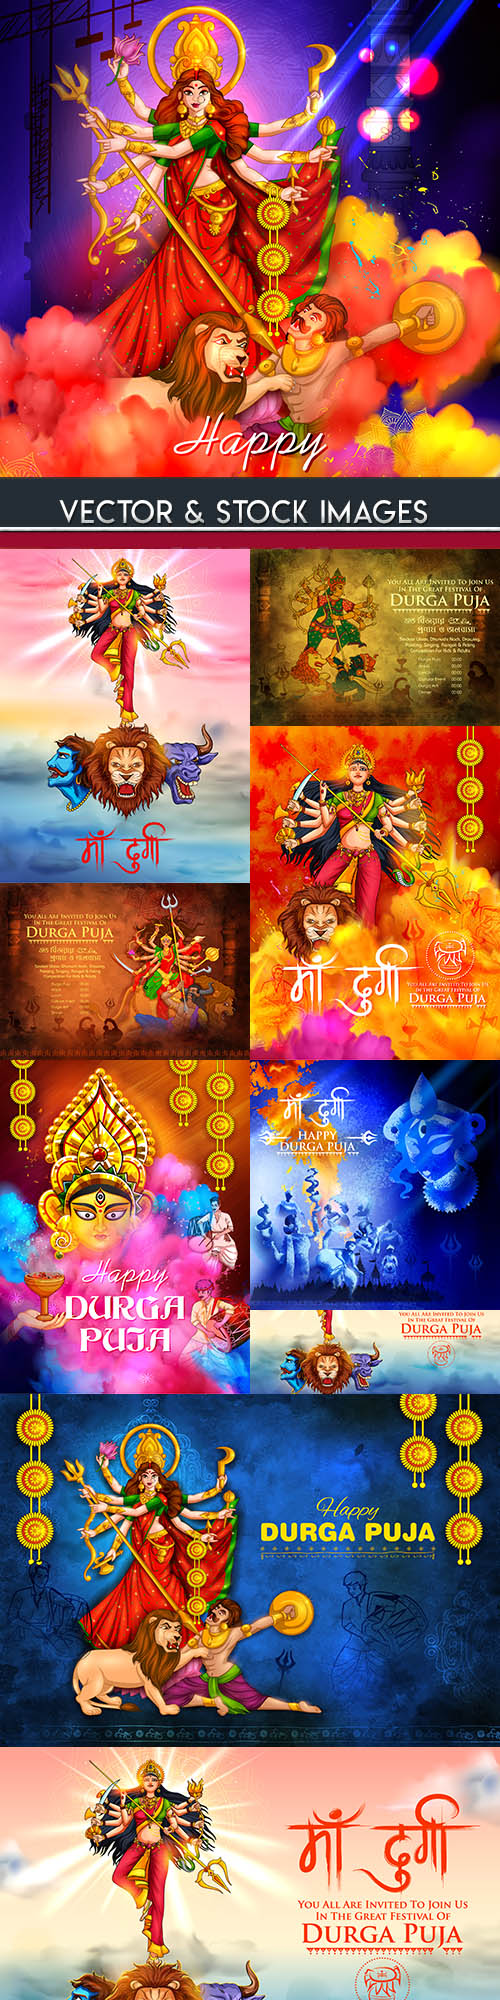 Happy Durga Puja traditional holiday collection illustrations